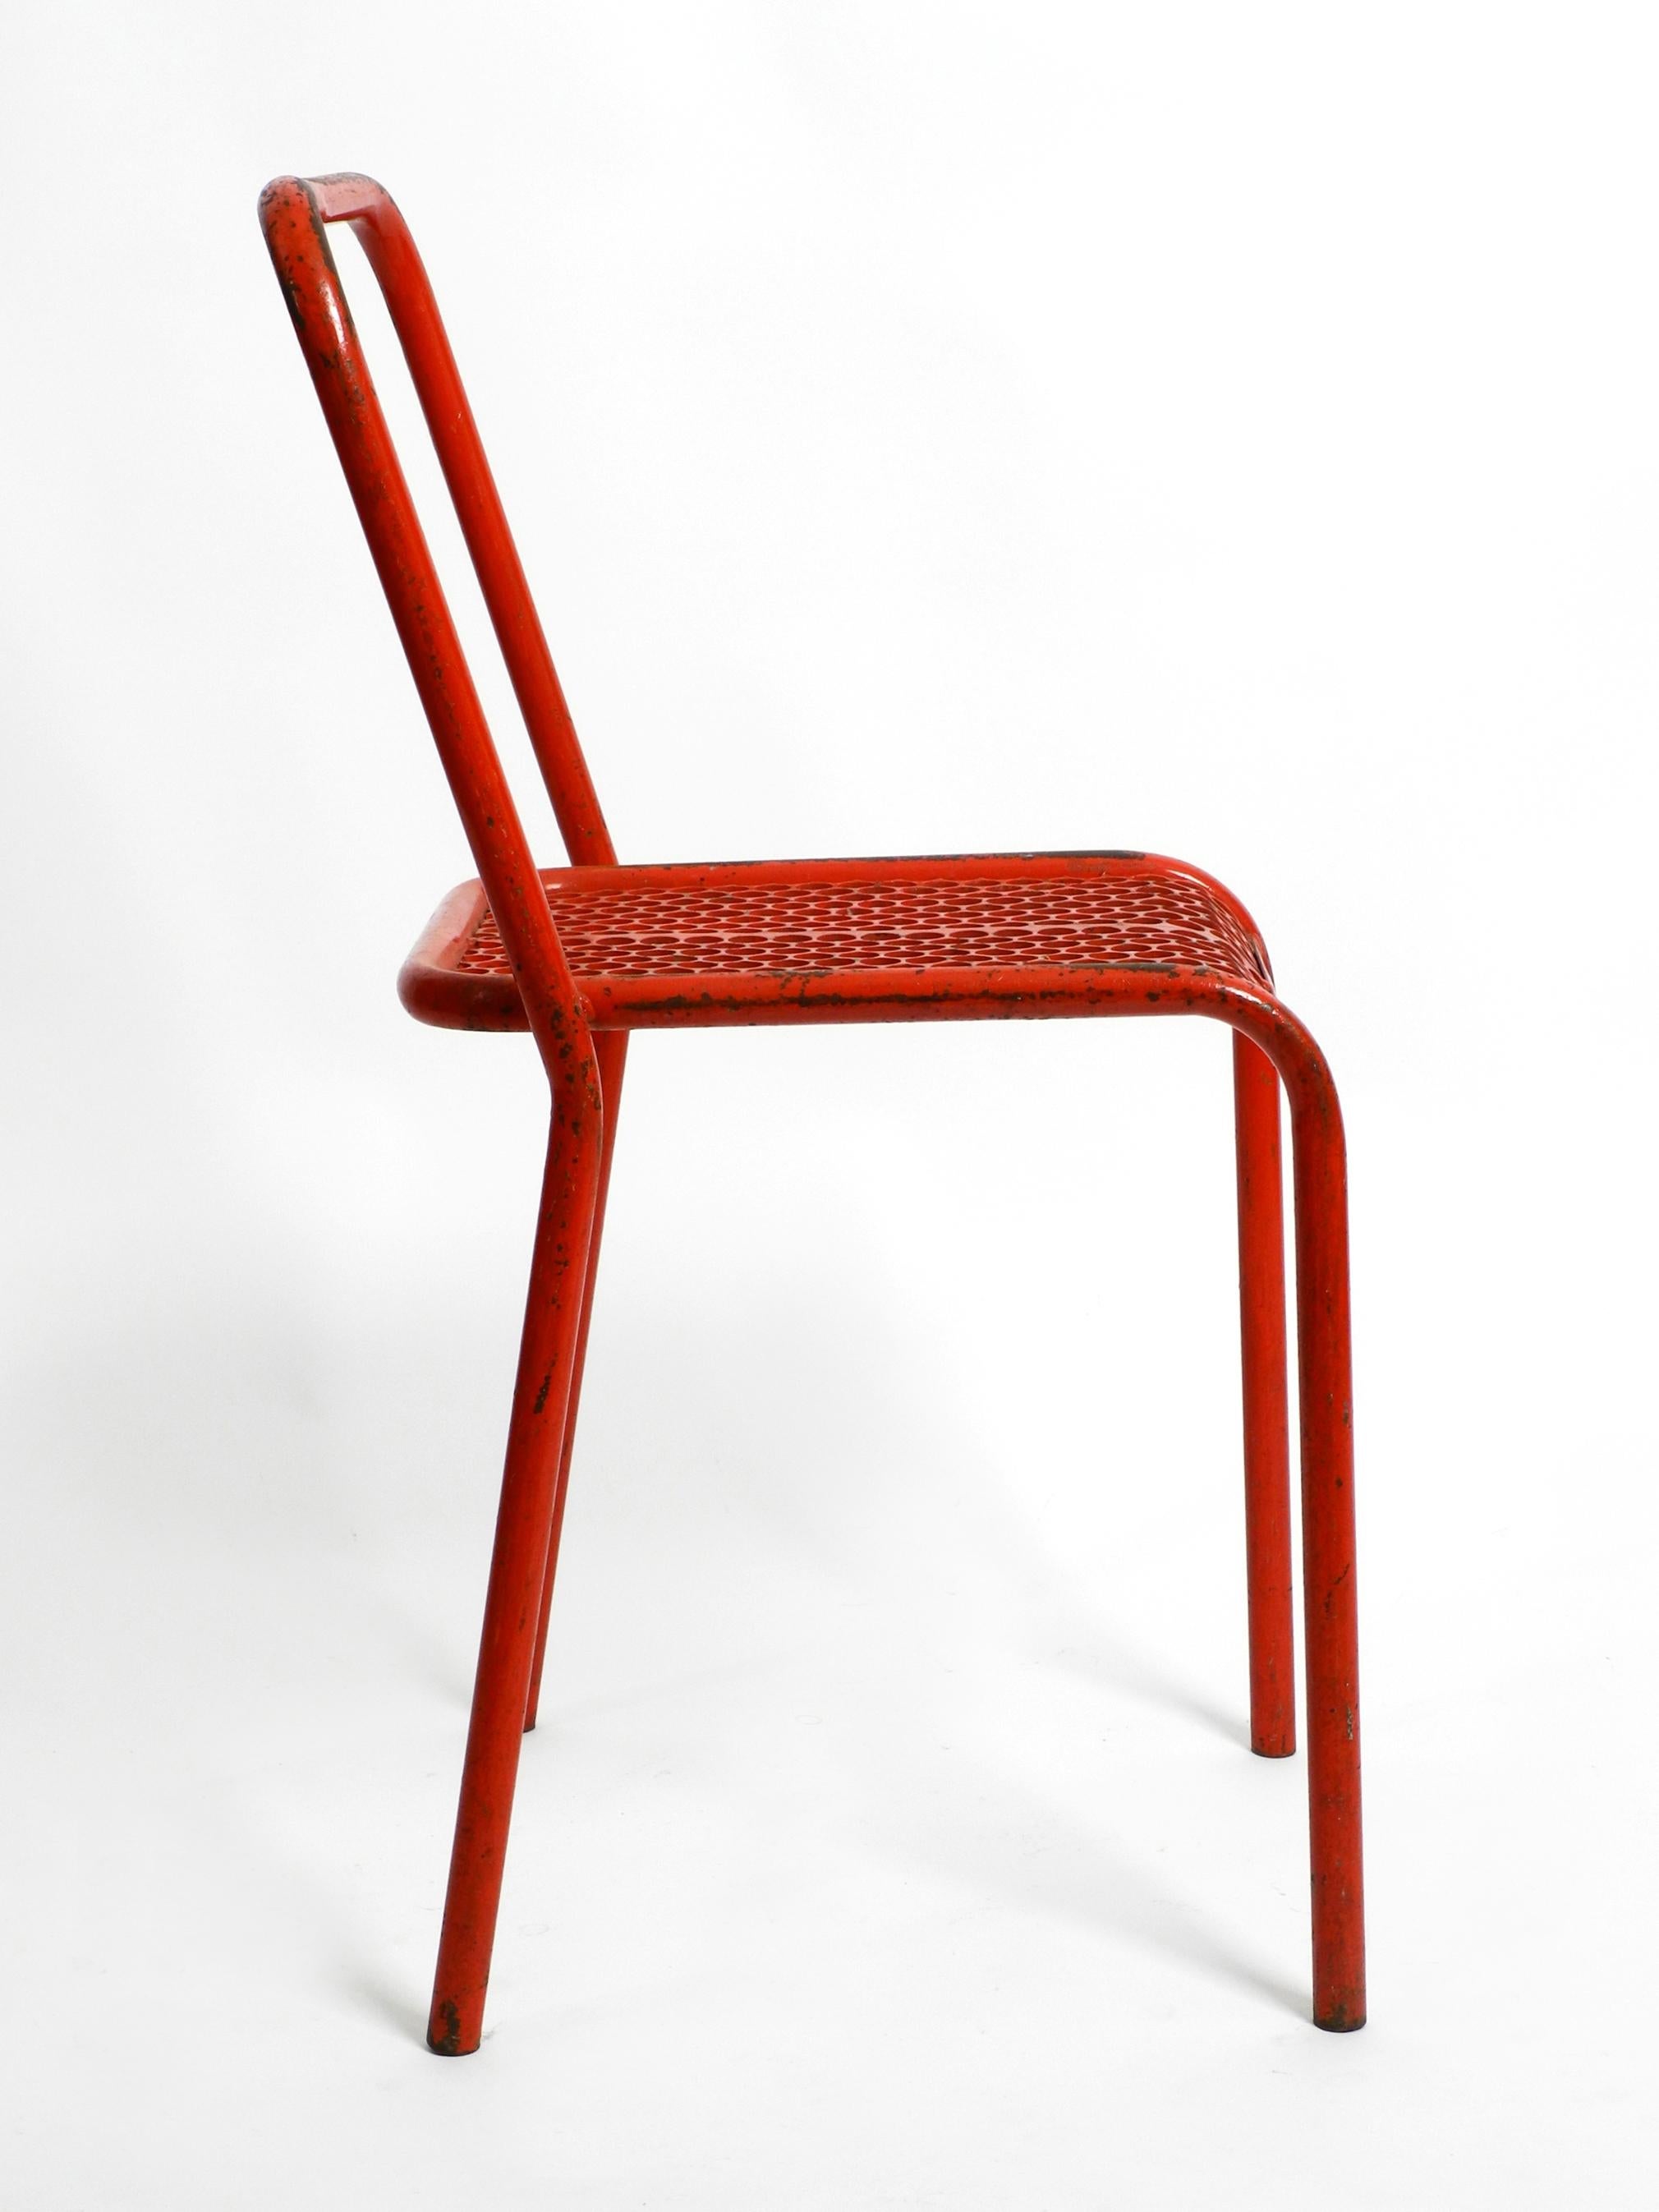 Mid-20th Century Four 1940s Industrial Metal Chairs by Réne Malaval in Their Original Red Color